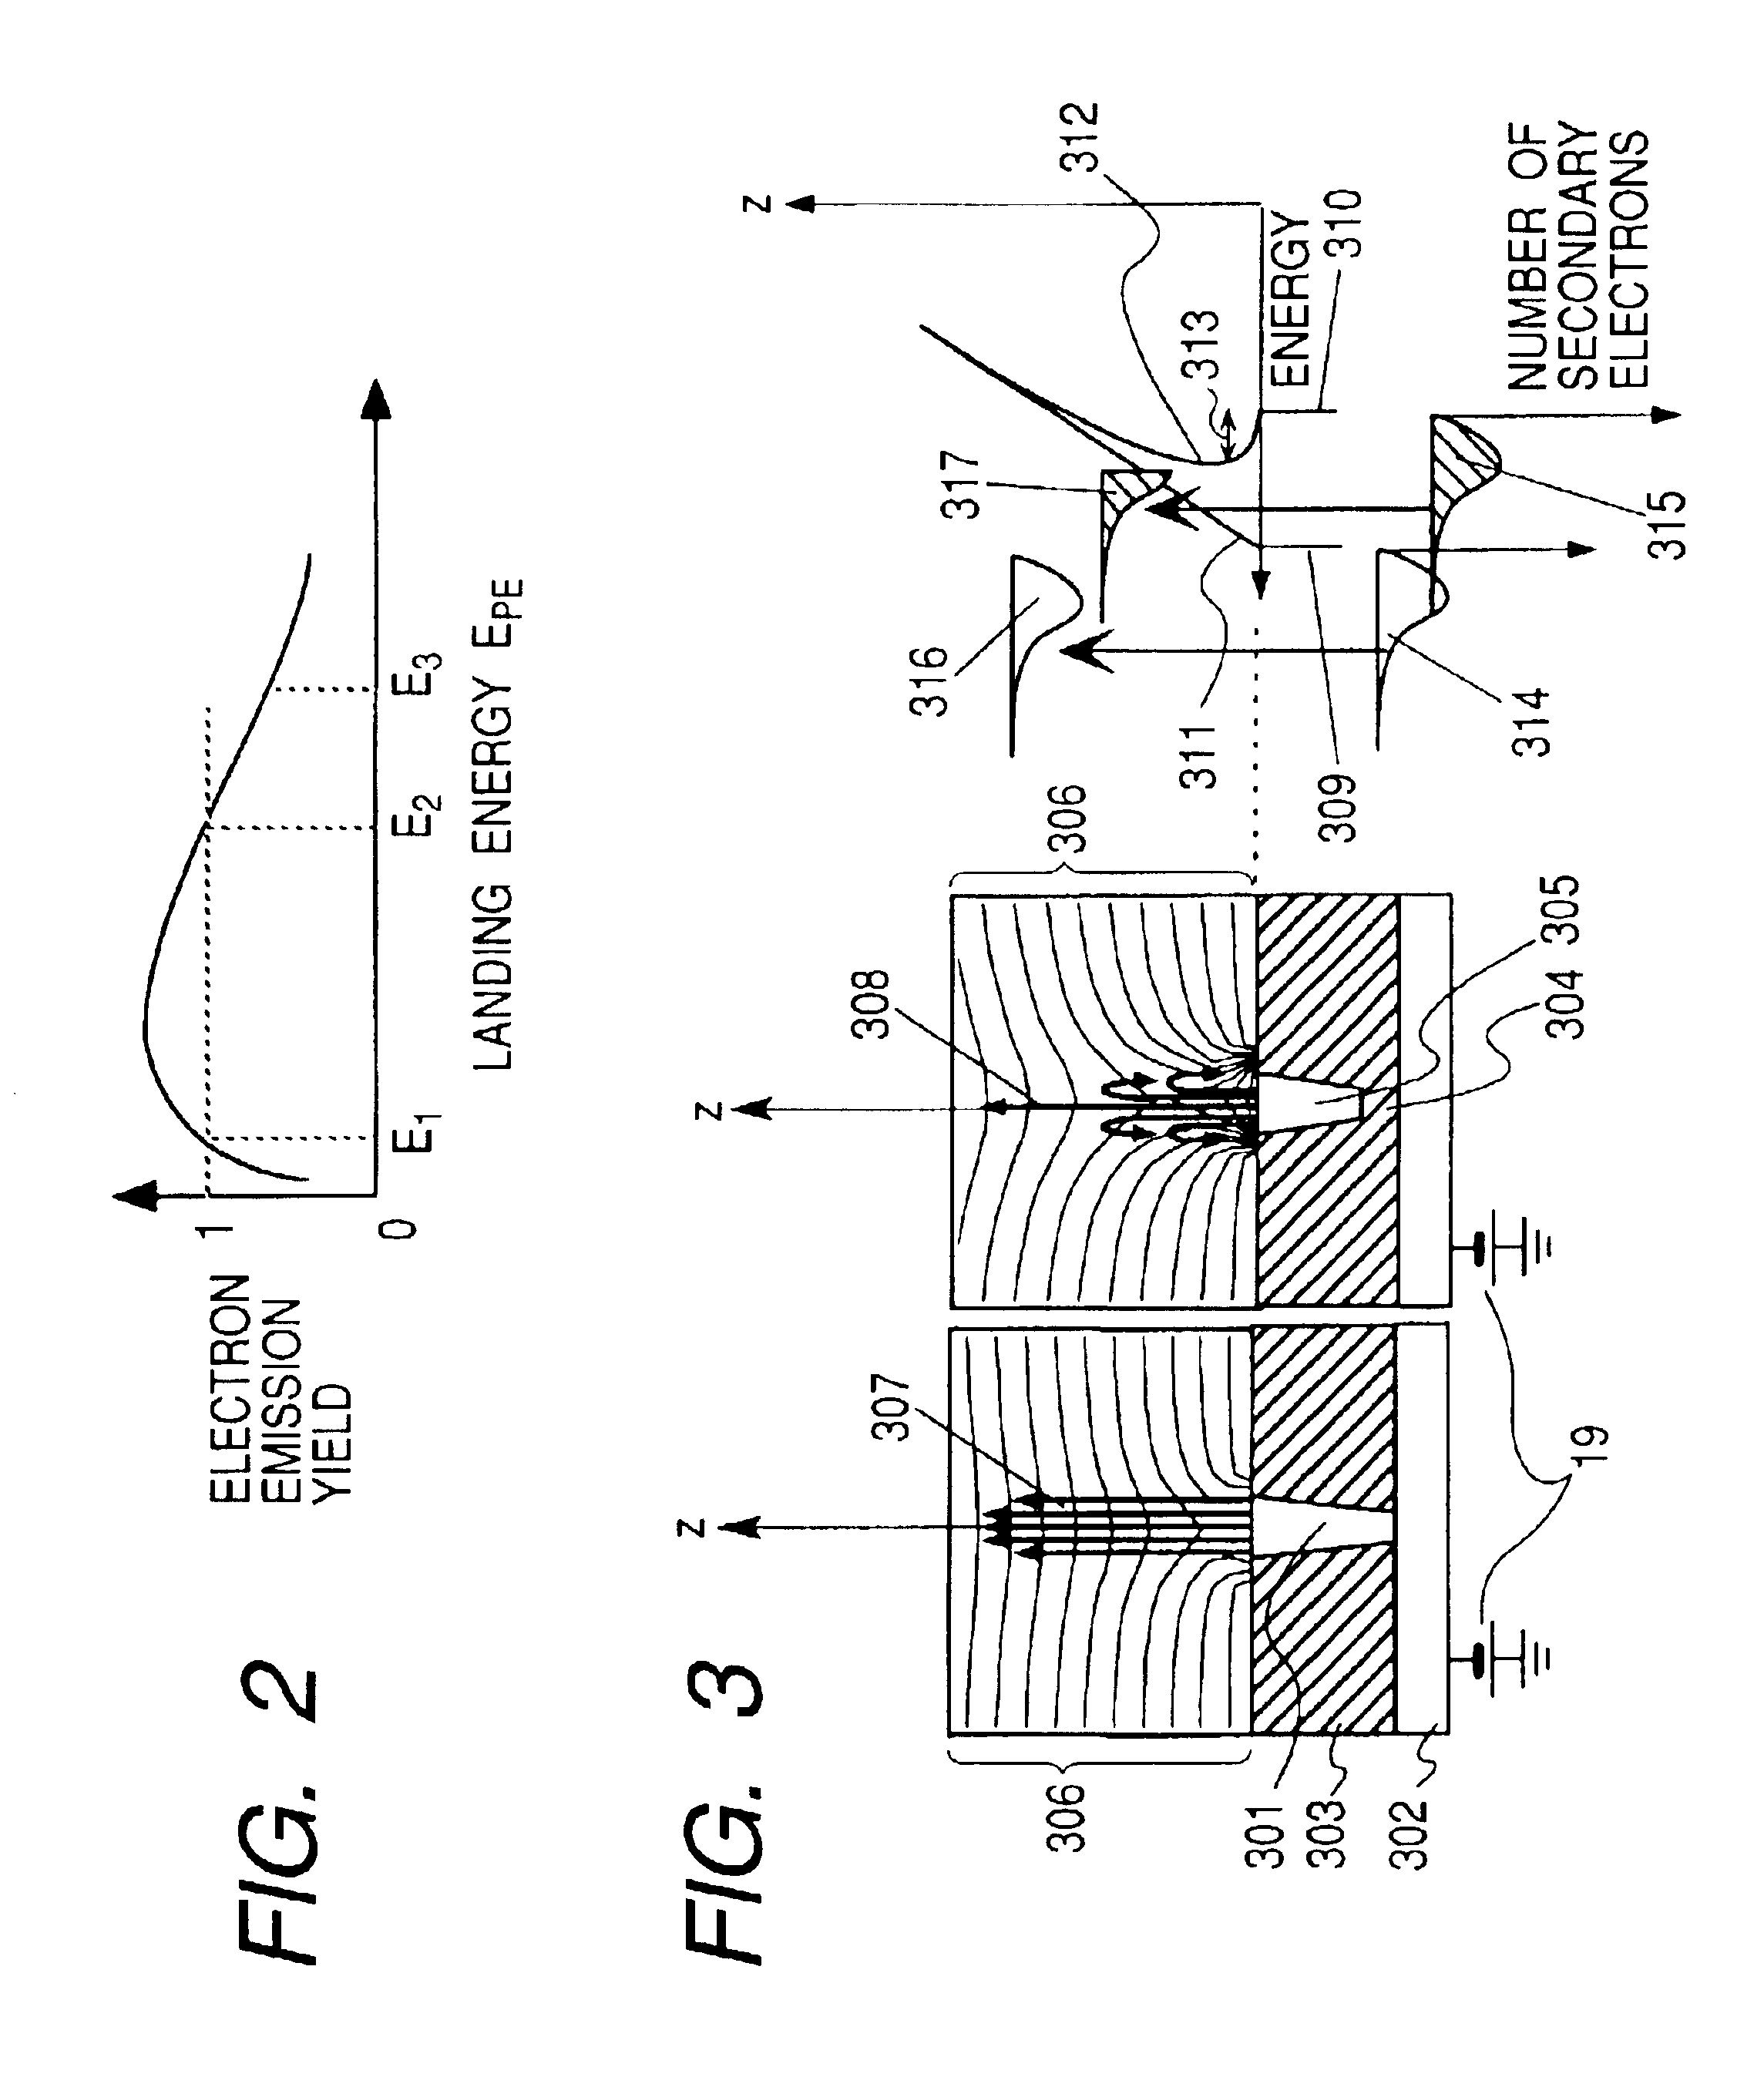 Wafer inspection method of charging wafer with a charged particle beam then measuring electric properties thereof, and inspection device based thereon